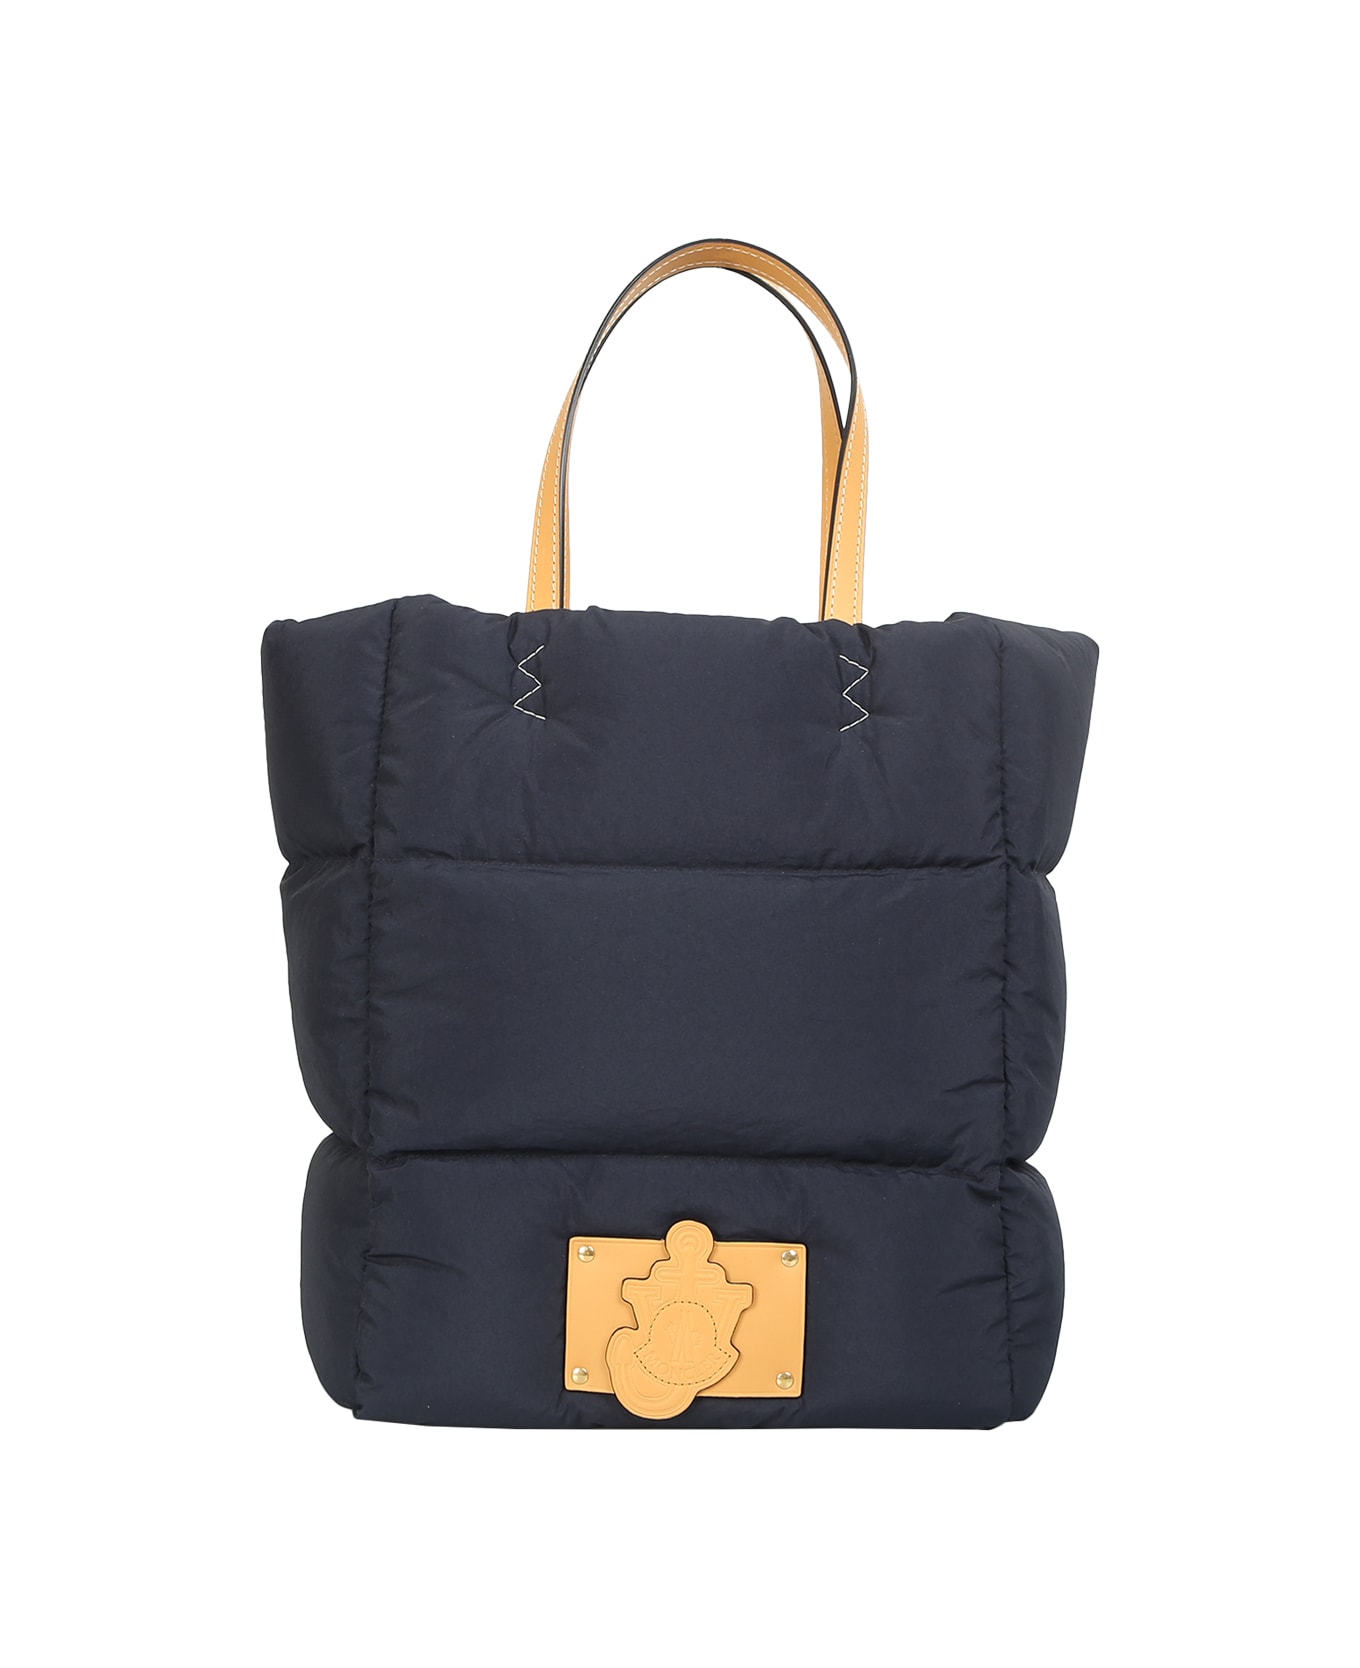 Moncler Genius Tote Bag - Moncler Jw Anderson - Yellow トートバッグ